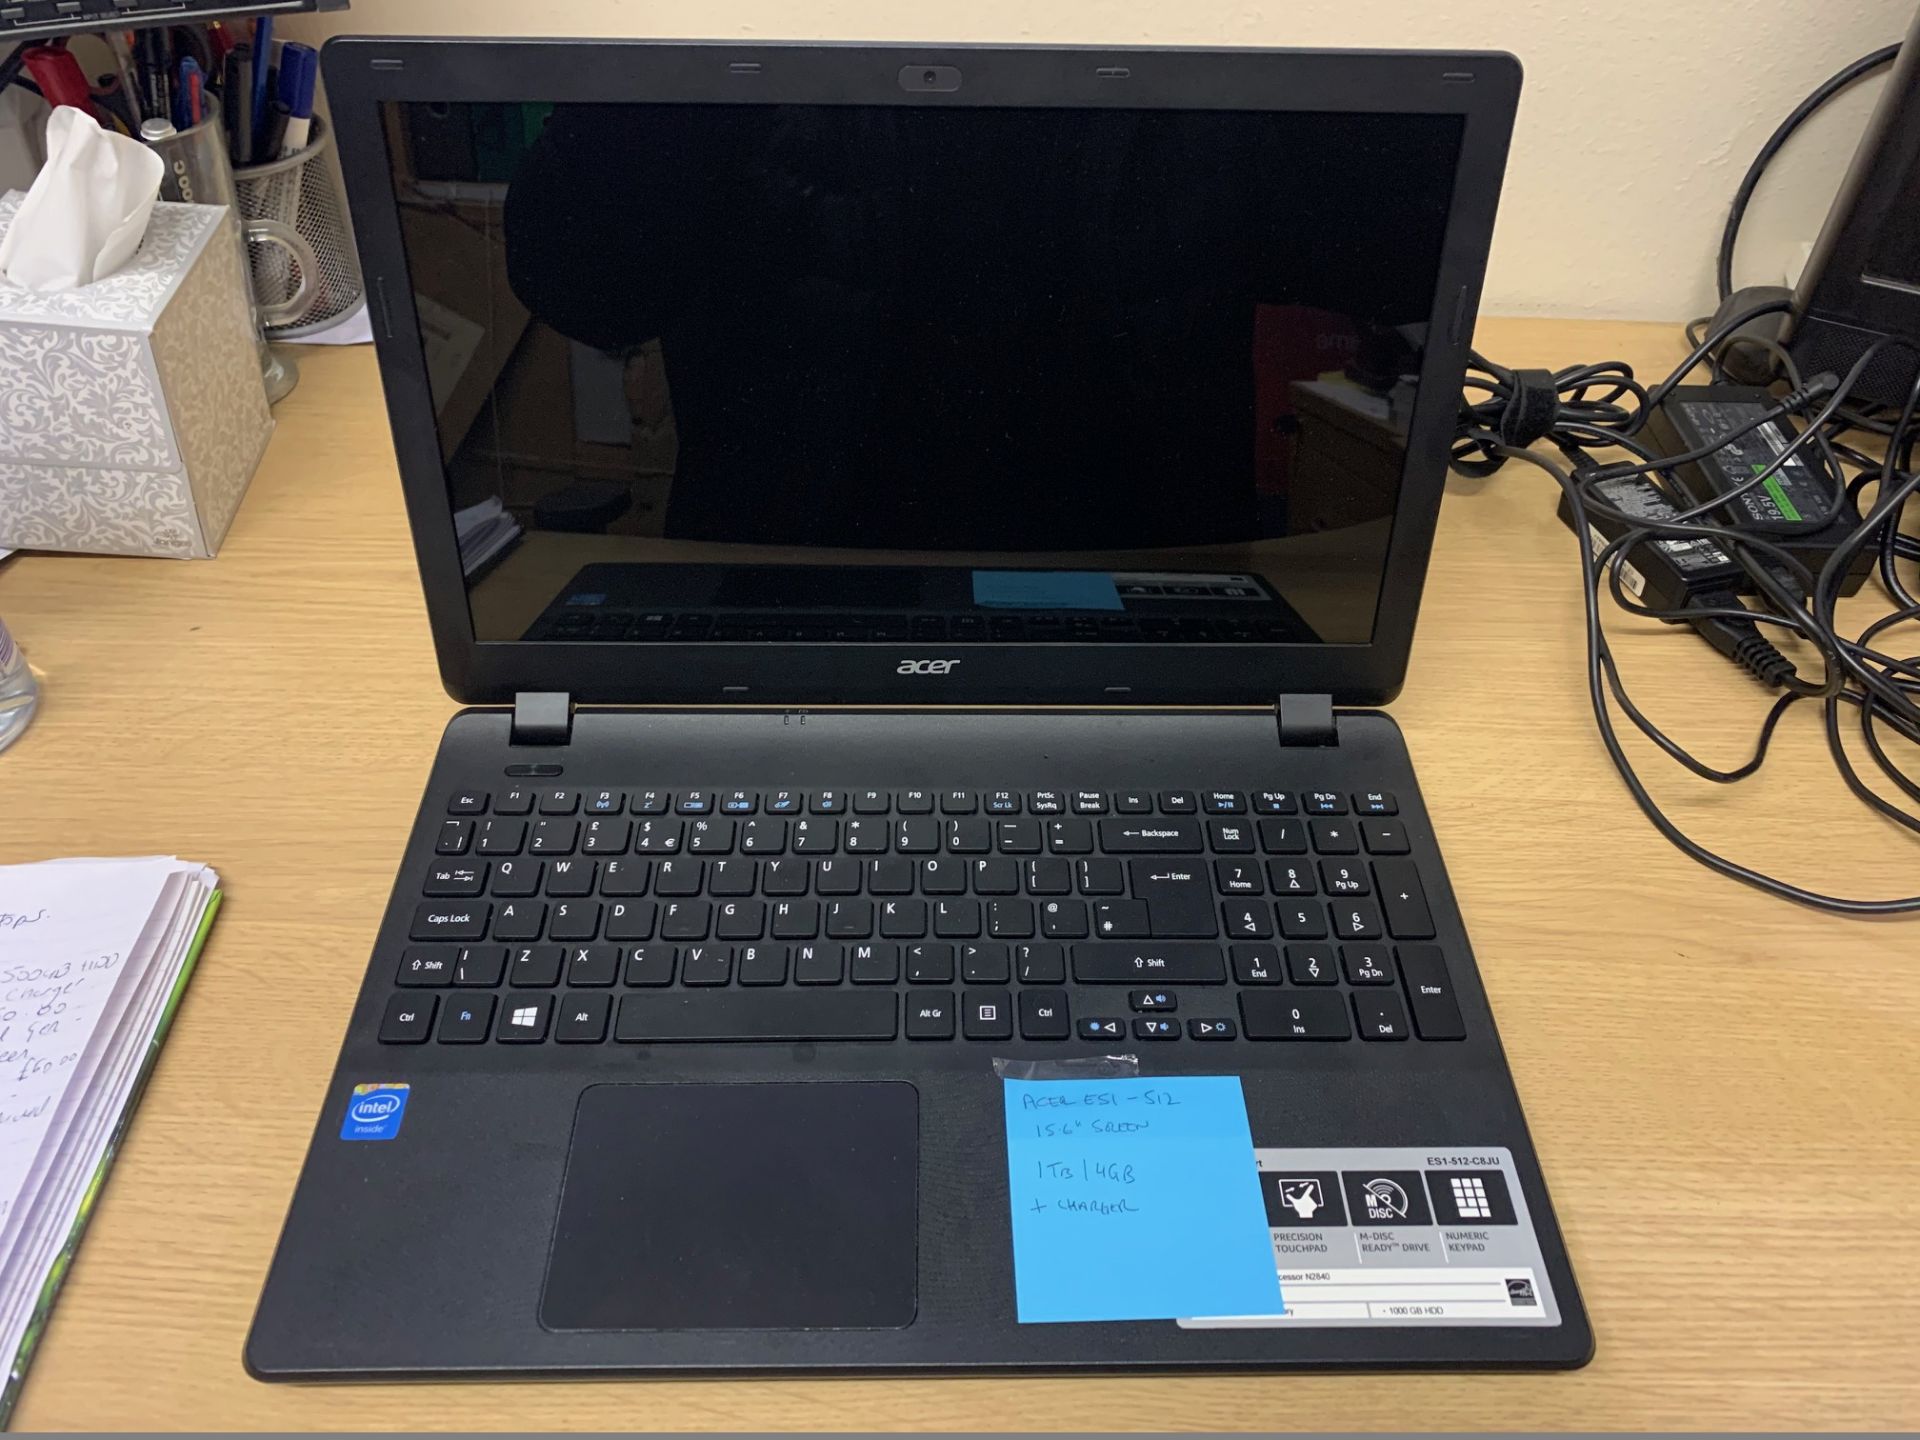 Acer E51-512 Laptop - 1TB Hard Drive, 4GB RAM, 15.6" Screen, Loaded With Windows 10 & Complete - Image 2 of 4